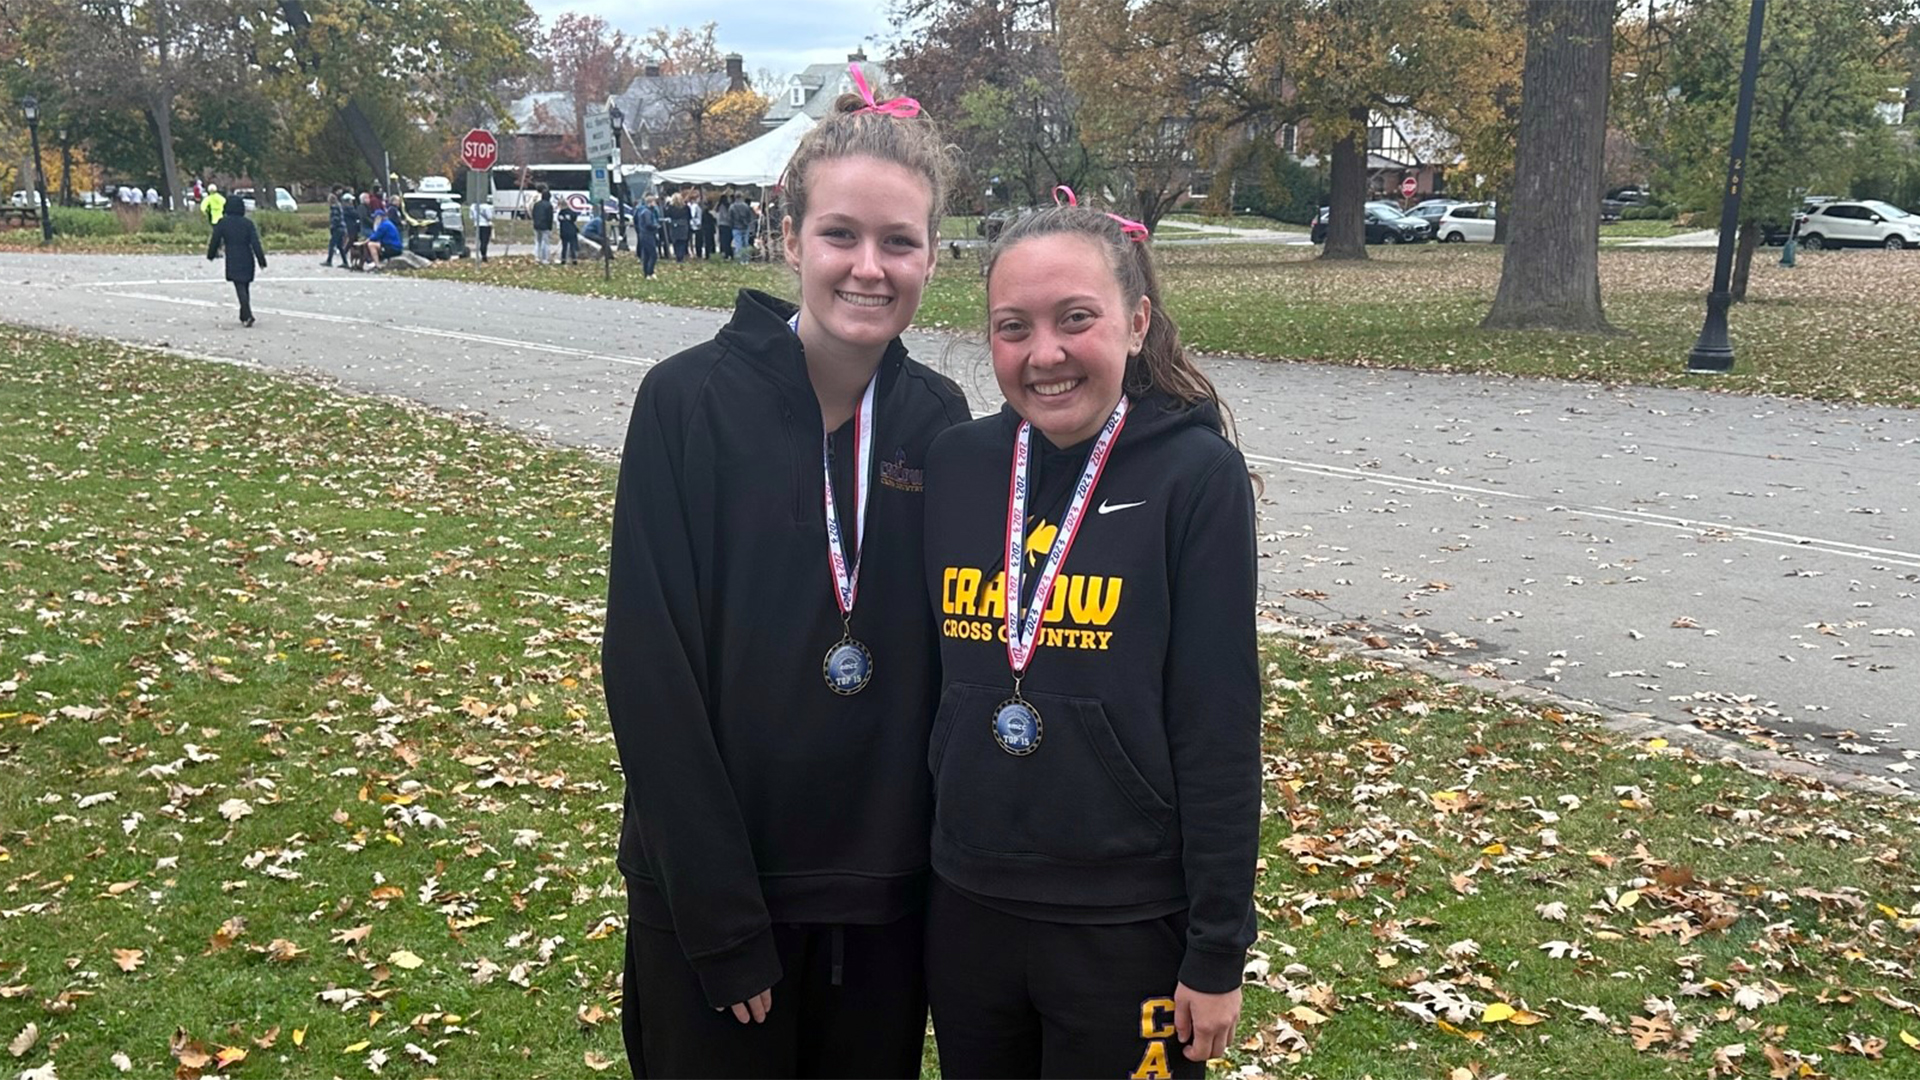 Ella Cloak and Laci Schwirian with their all-conference medals post-race. Photo by Lou Zadecky.